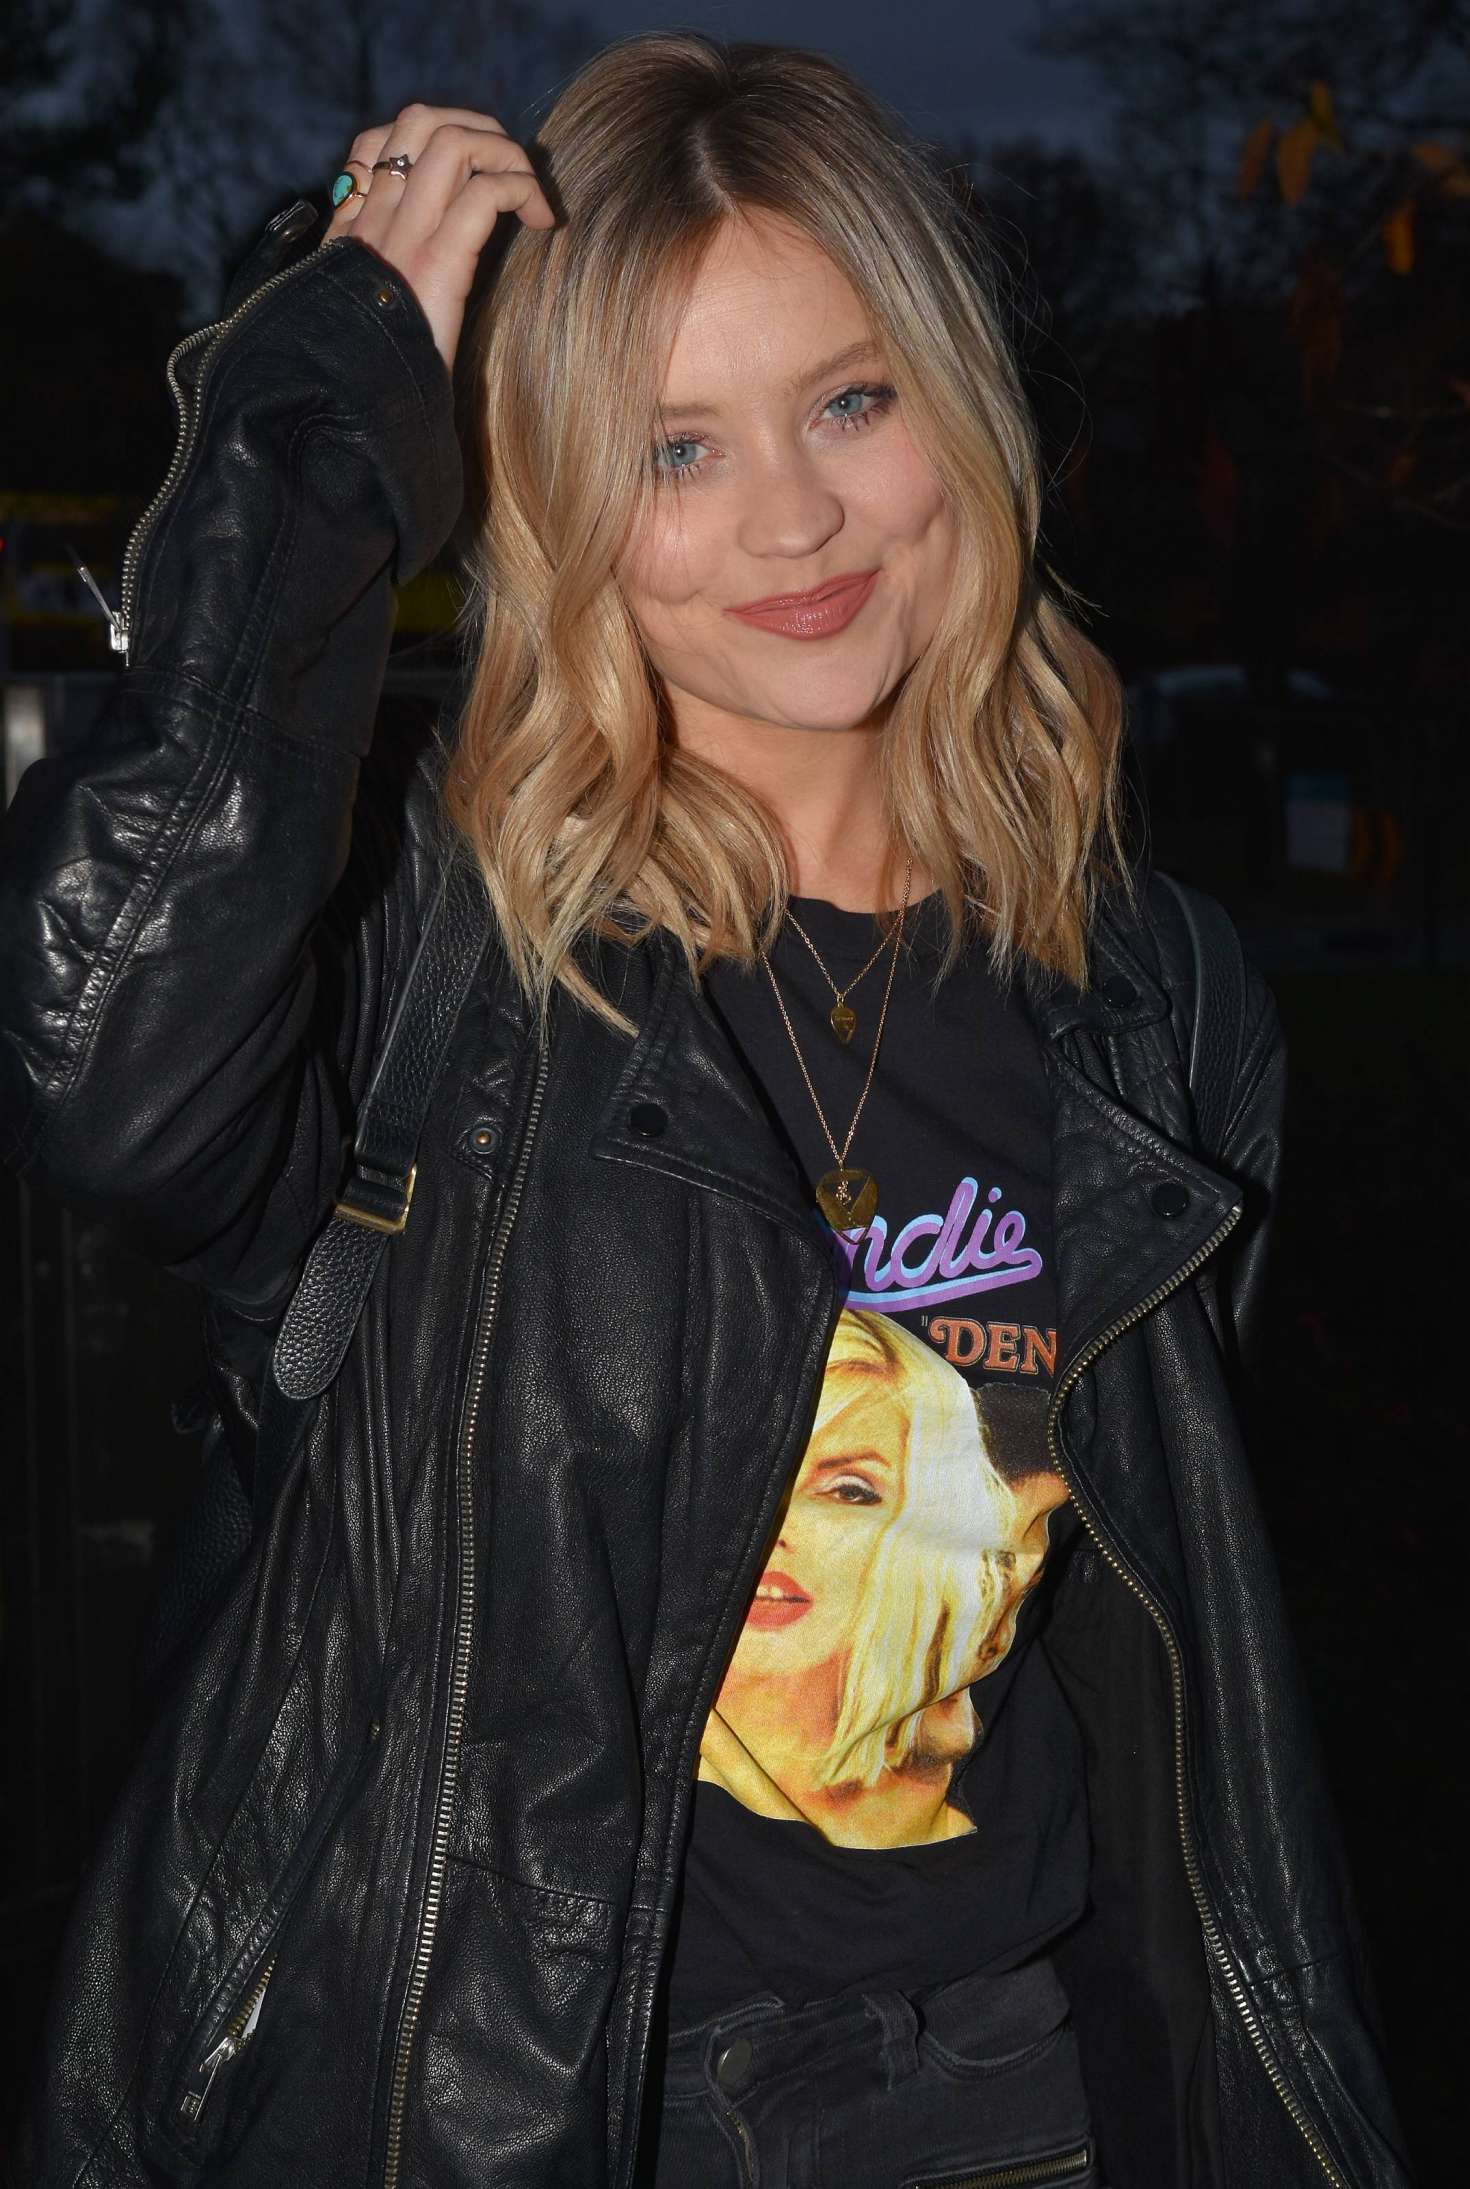 Laura Whitmore â€“ Eoghan McDermott Show & Ray Darcy Show in Dublin